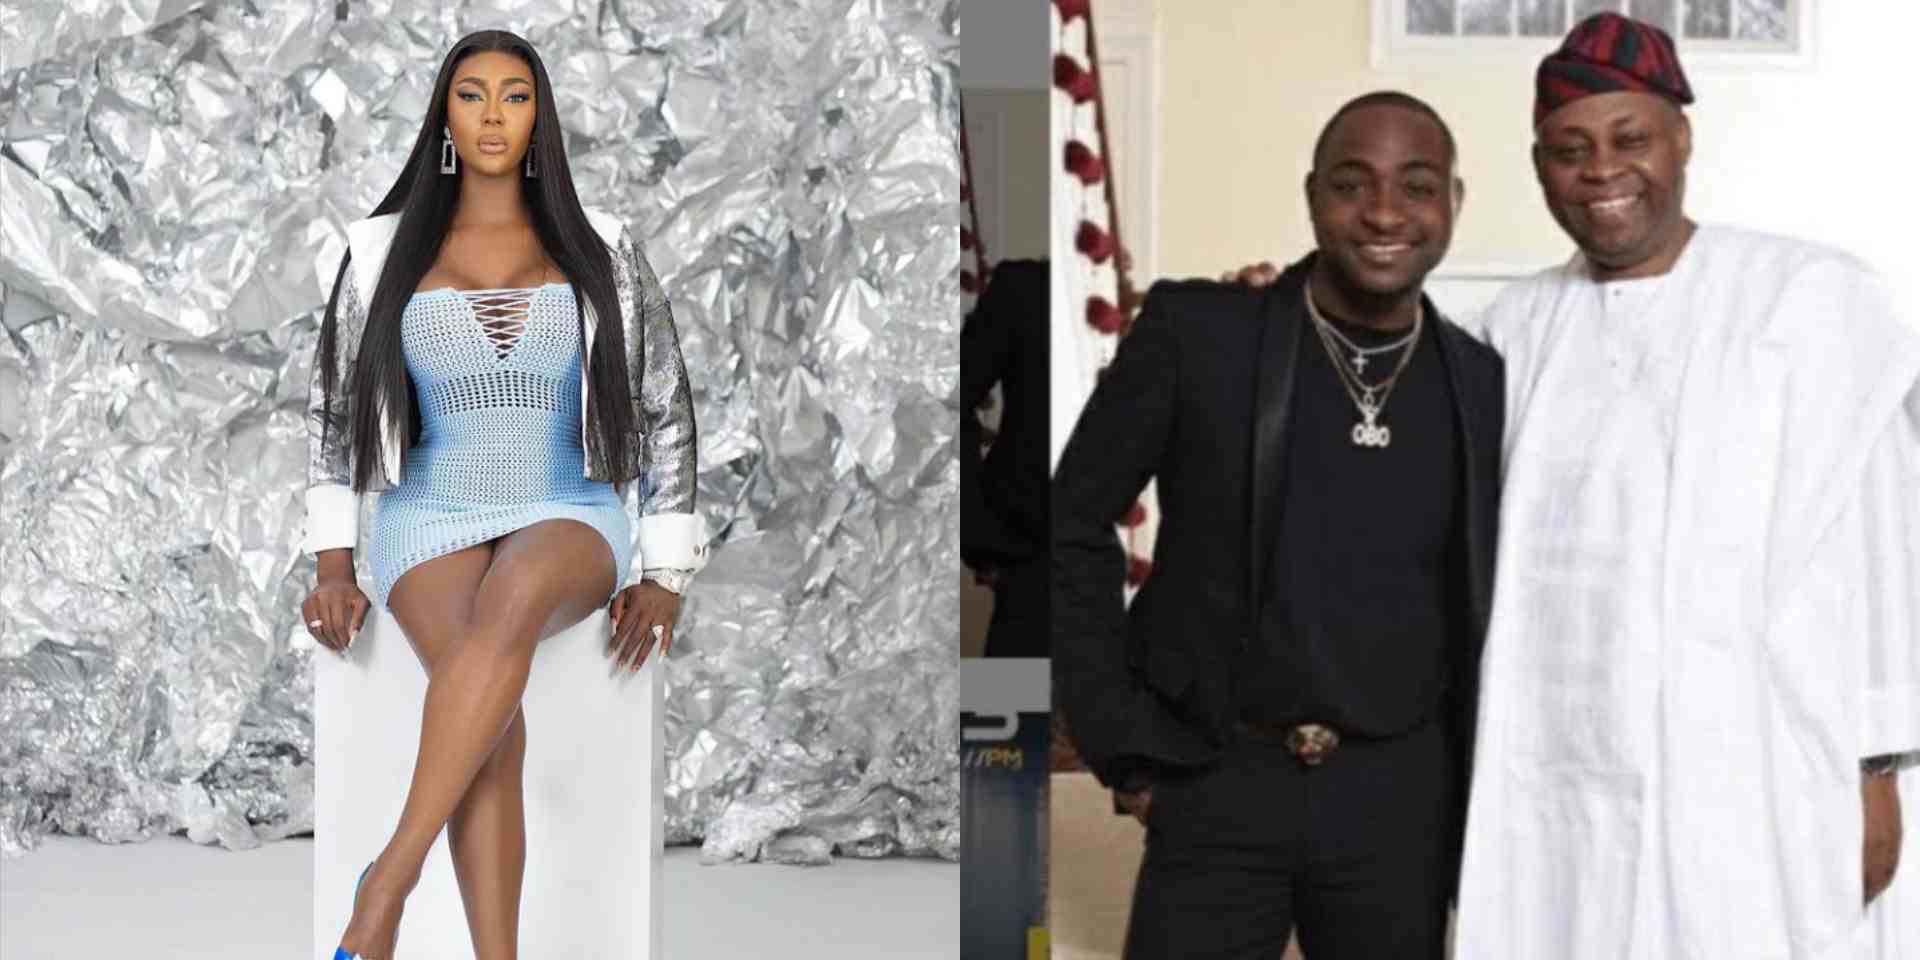 Weeks after being accused of dating Davido's father, actress Faith Morey announces divorce from husband